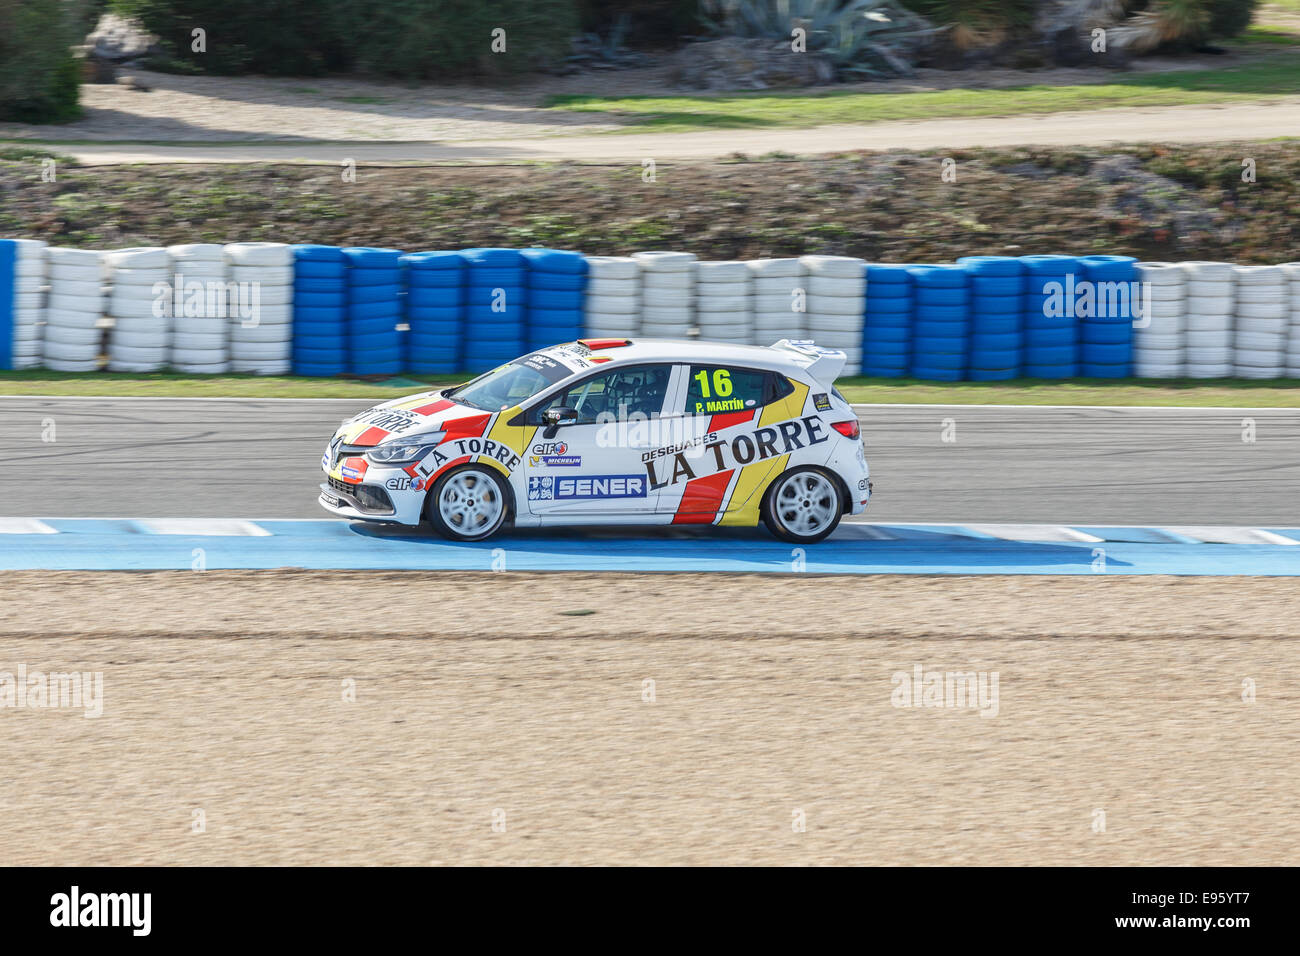 Pablo Martin of SMC Junior Team  drives his car during qualifying session at Jerez racetrack Stock Photo